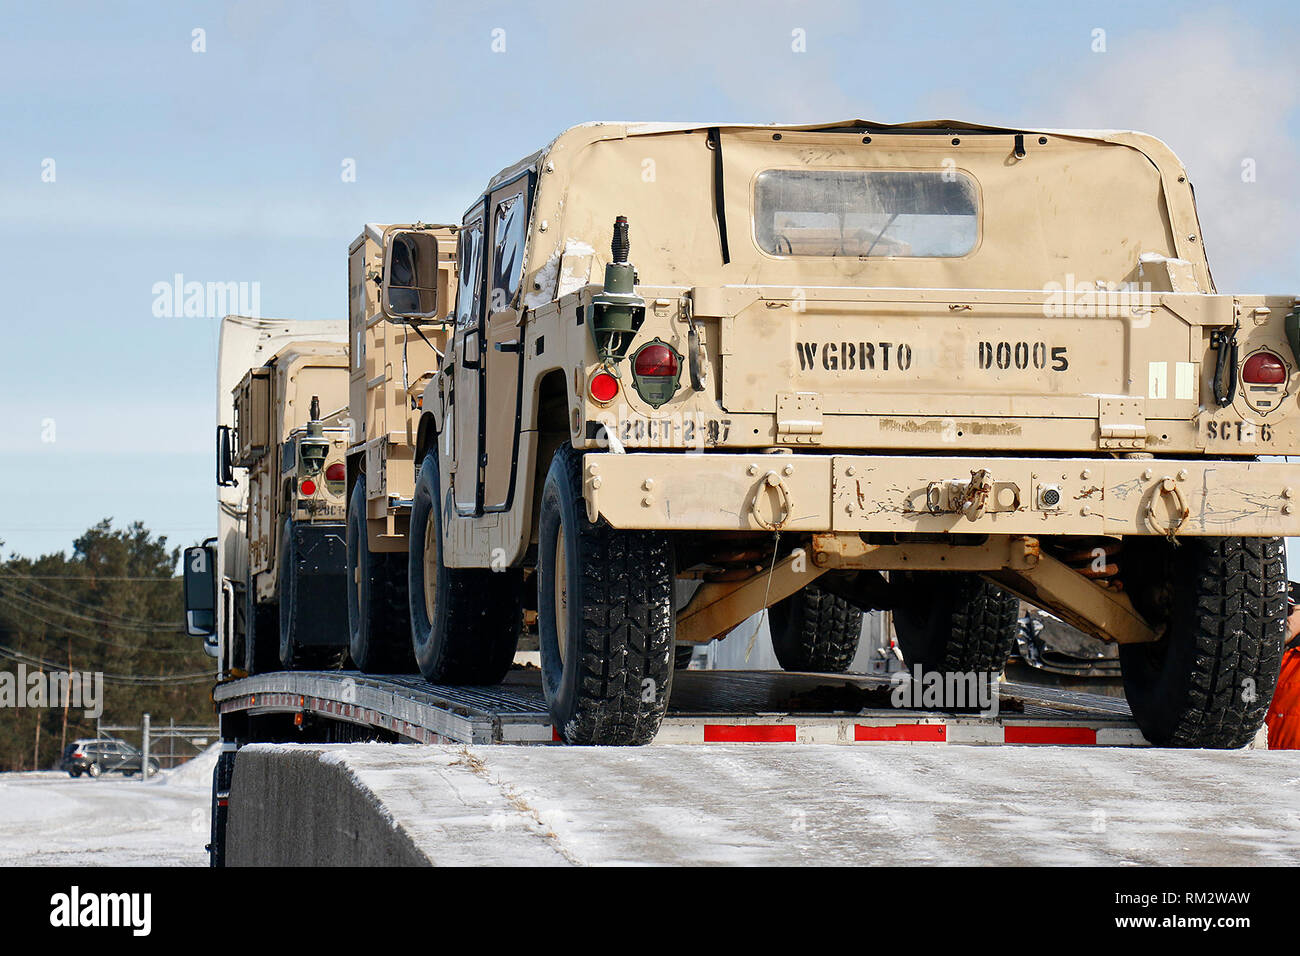 Soldiers of the 2nd Brigade Combat Team, 10th Mountain Division, load vehicles for transport to Fort Polk, Louisiana, as the brigade's rear element prepares for a series of training support missions for units across the division, February 11, 2019, at Fort Drum, New York. While half the brigade is deployed to Afghanistan and Kosovo as Task Force Courage, the remaining Commando Soldiers comprising Task Forces Honor and Hale will head to the Joint Readiness Training Center to support 10MTN readiness as a whole during a series of back-to-back series of training exercises.(U.S. Army photo by Staff Stock Photo